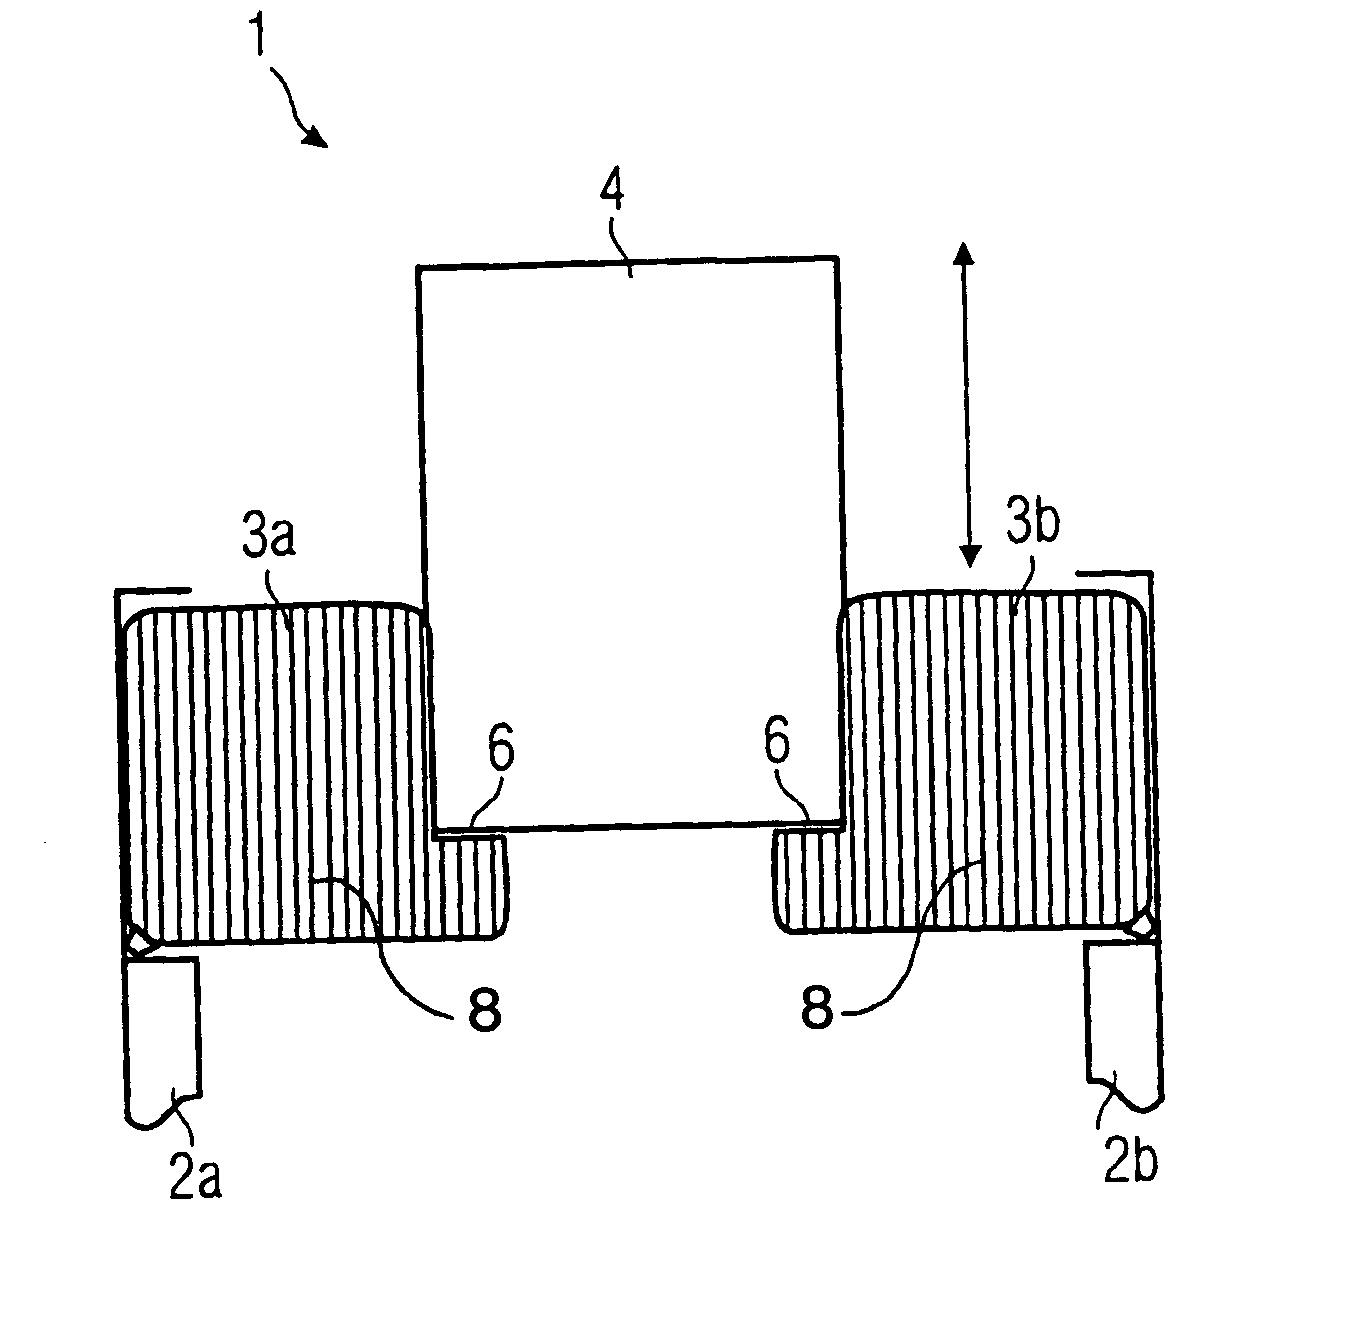 Load-lifting device for handling items